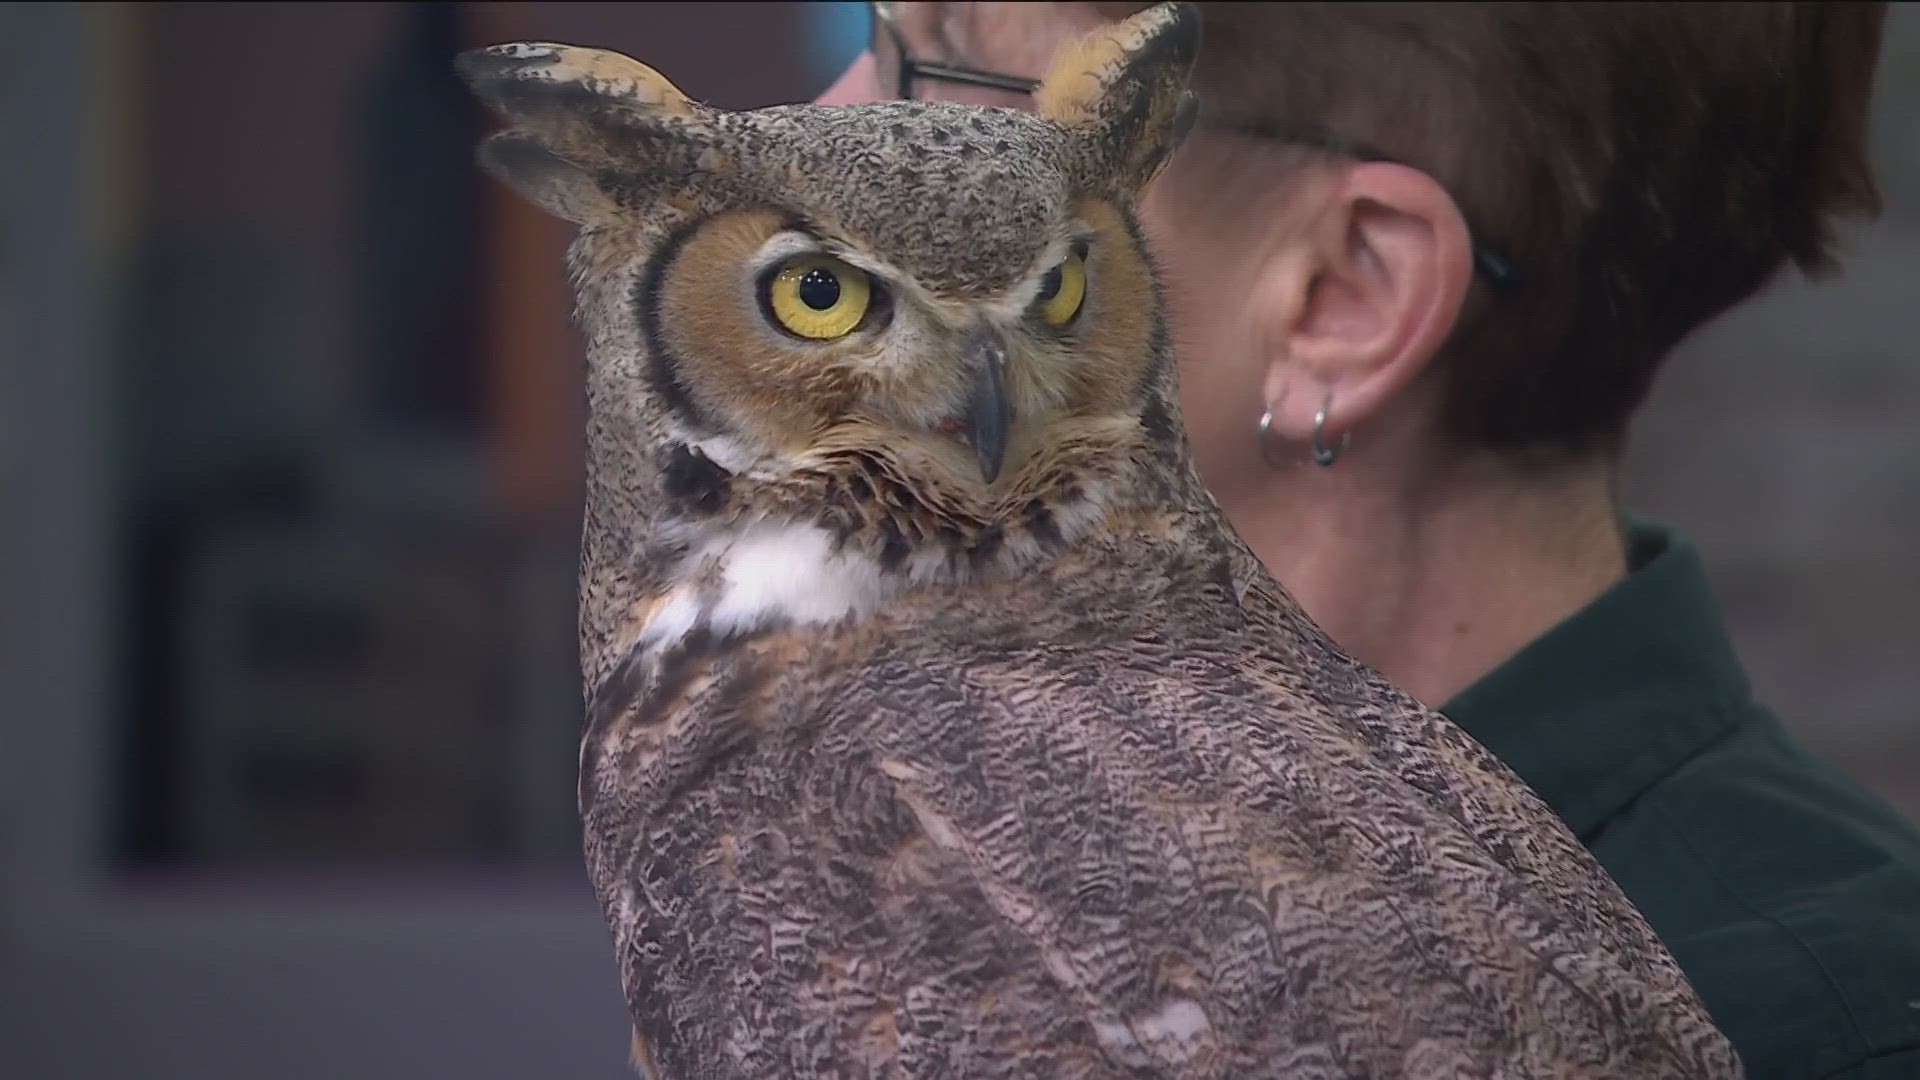 The Minnesota Raptor Center stopped by KARE 11 Saturday to share some fun facts and info on what you should do if you spot a nesting or baby owl in the wild.